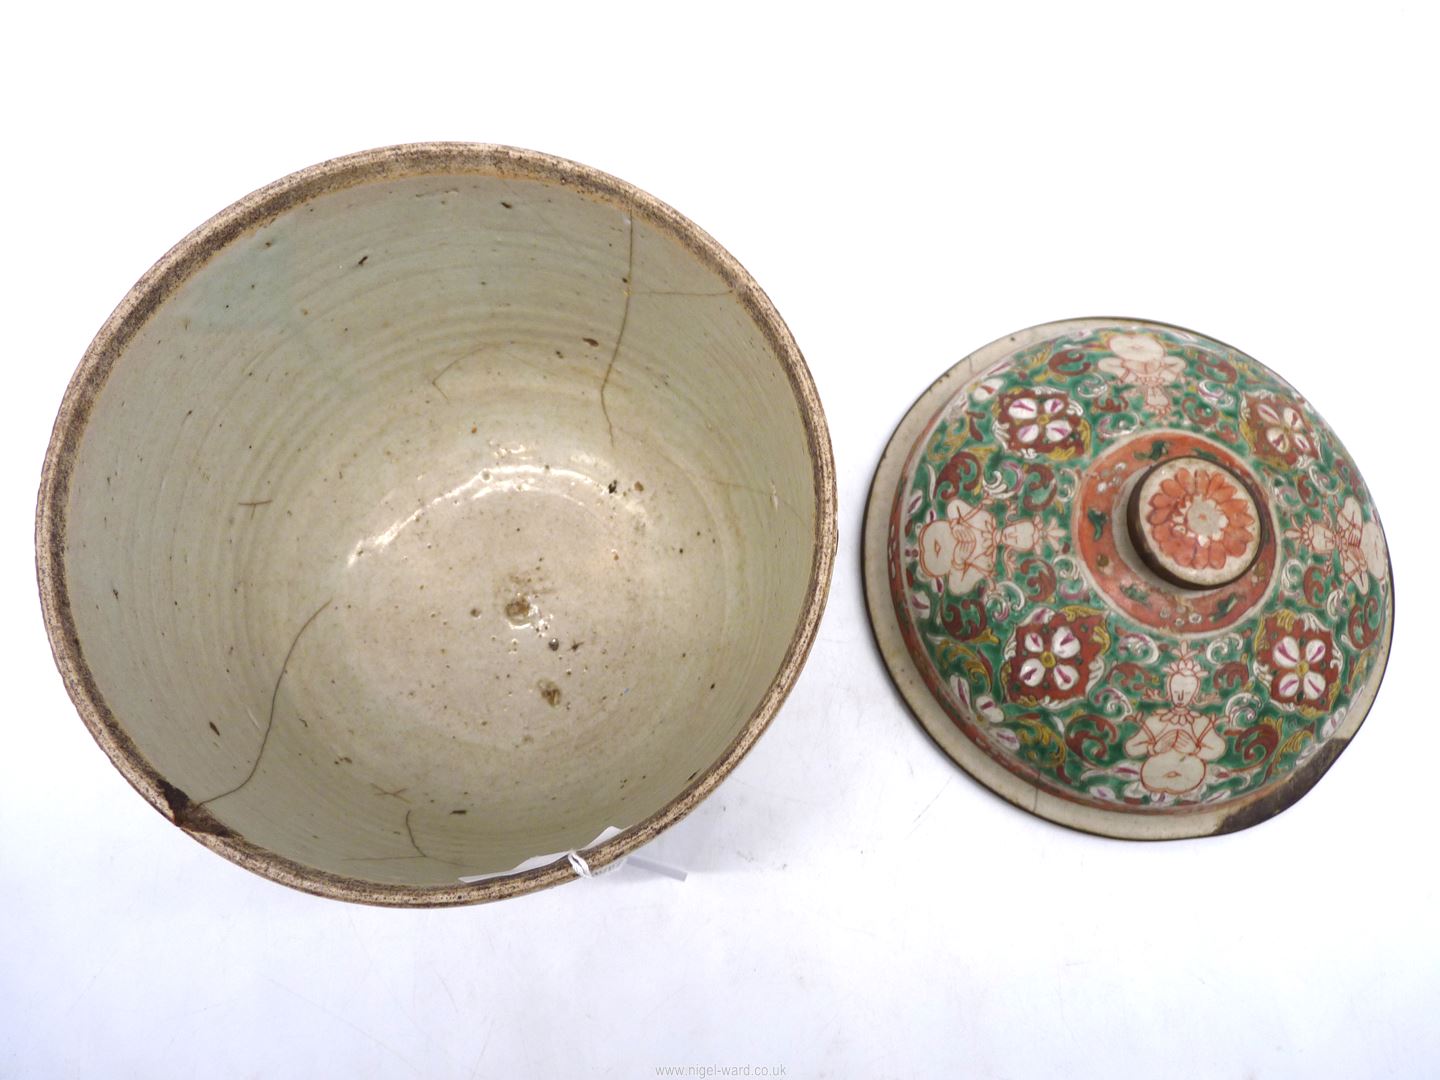 A large Benjarong covered Vessel (Chinese porcelain for the Thai market) 18th-19th century painted - Image 2 of 3